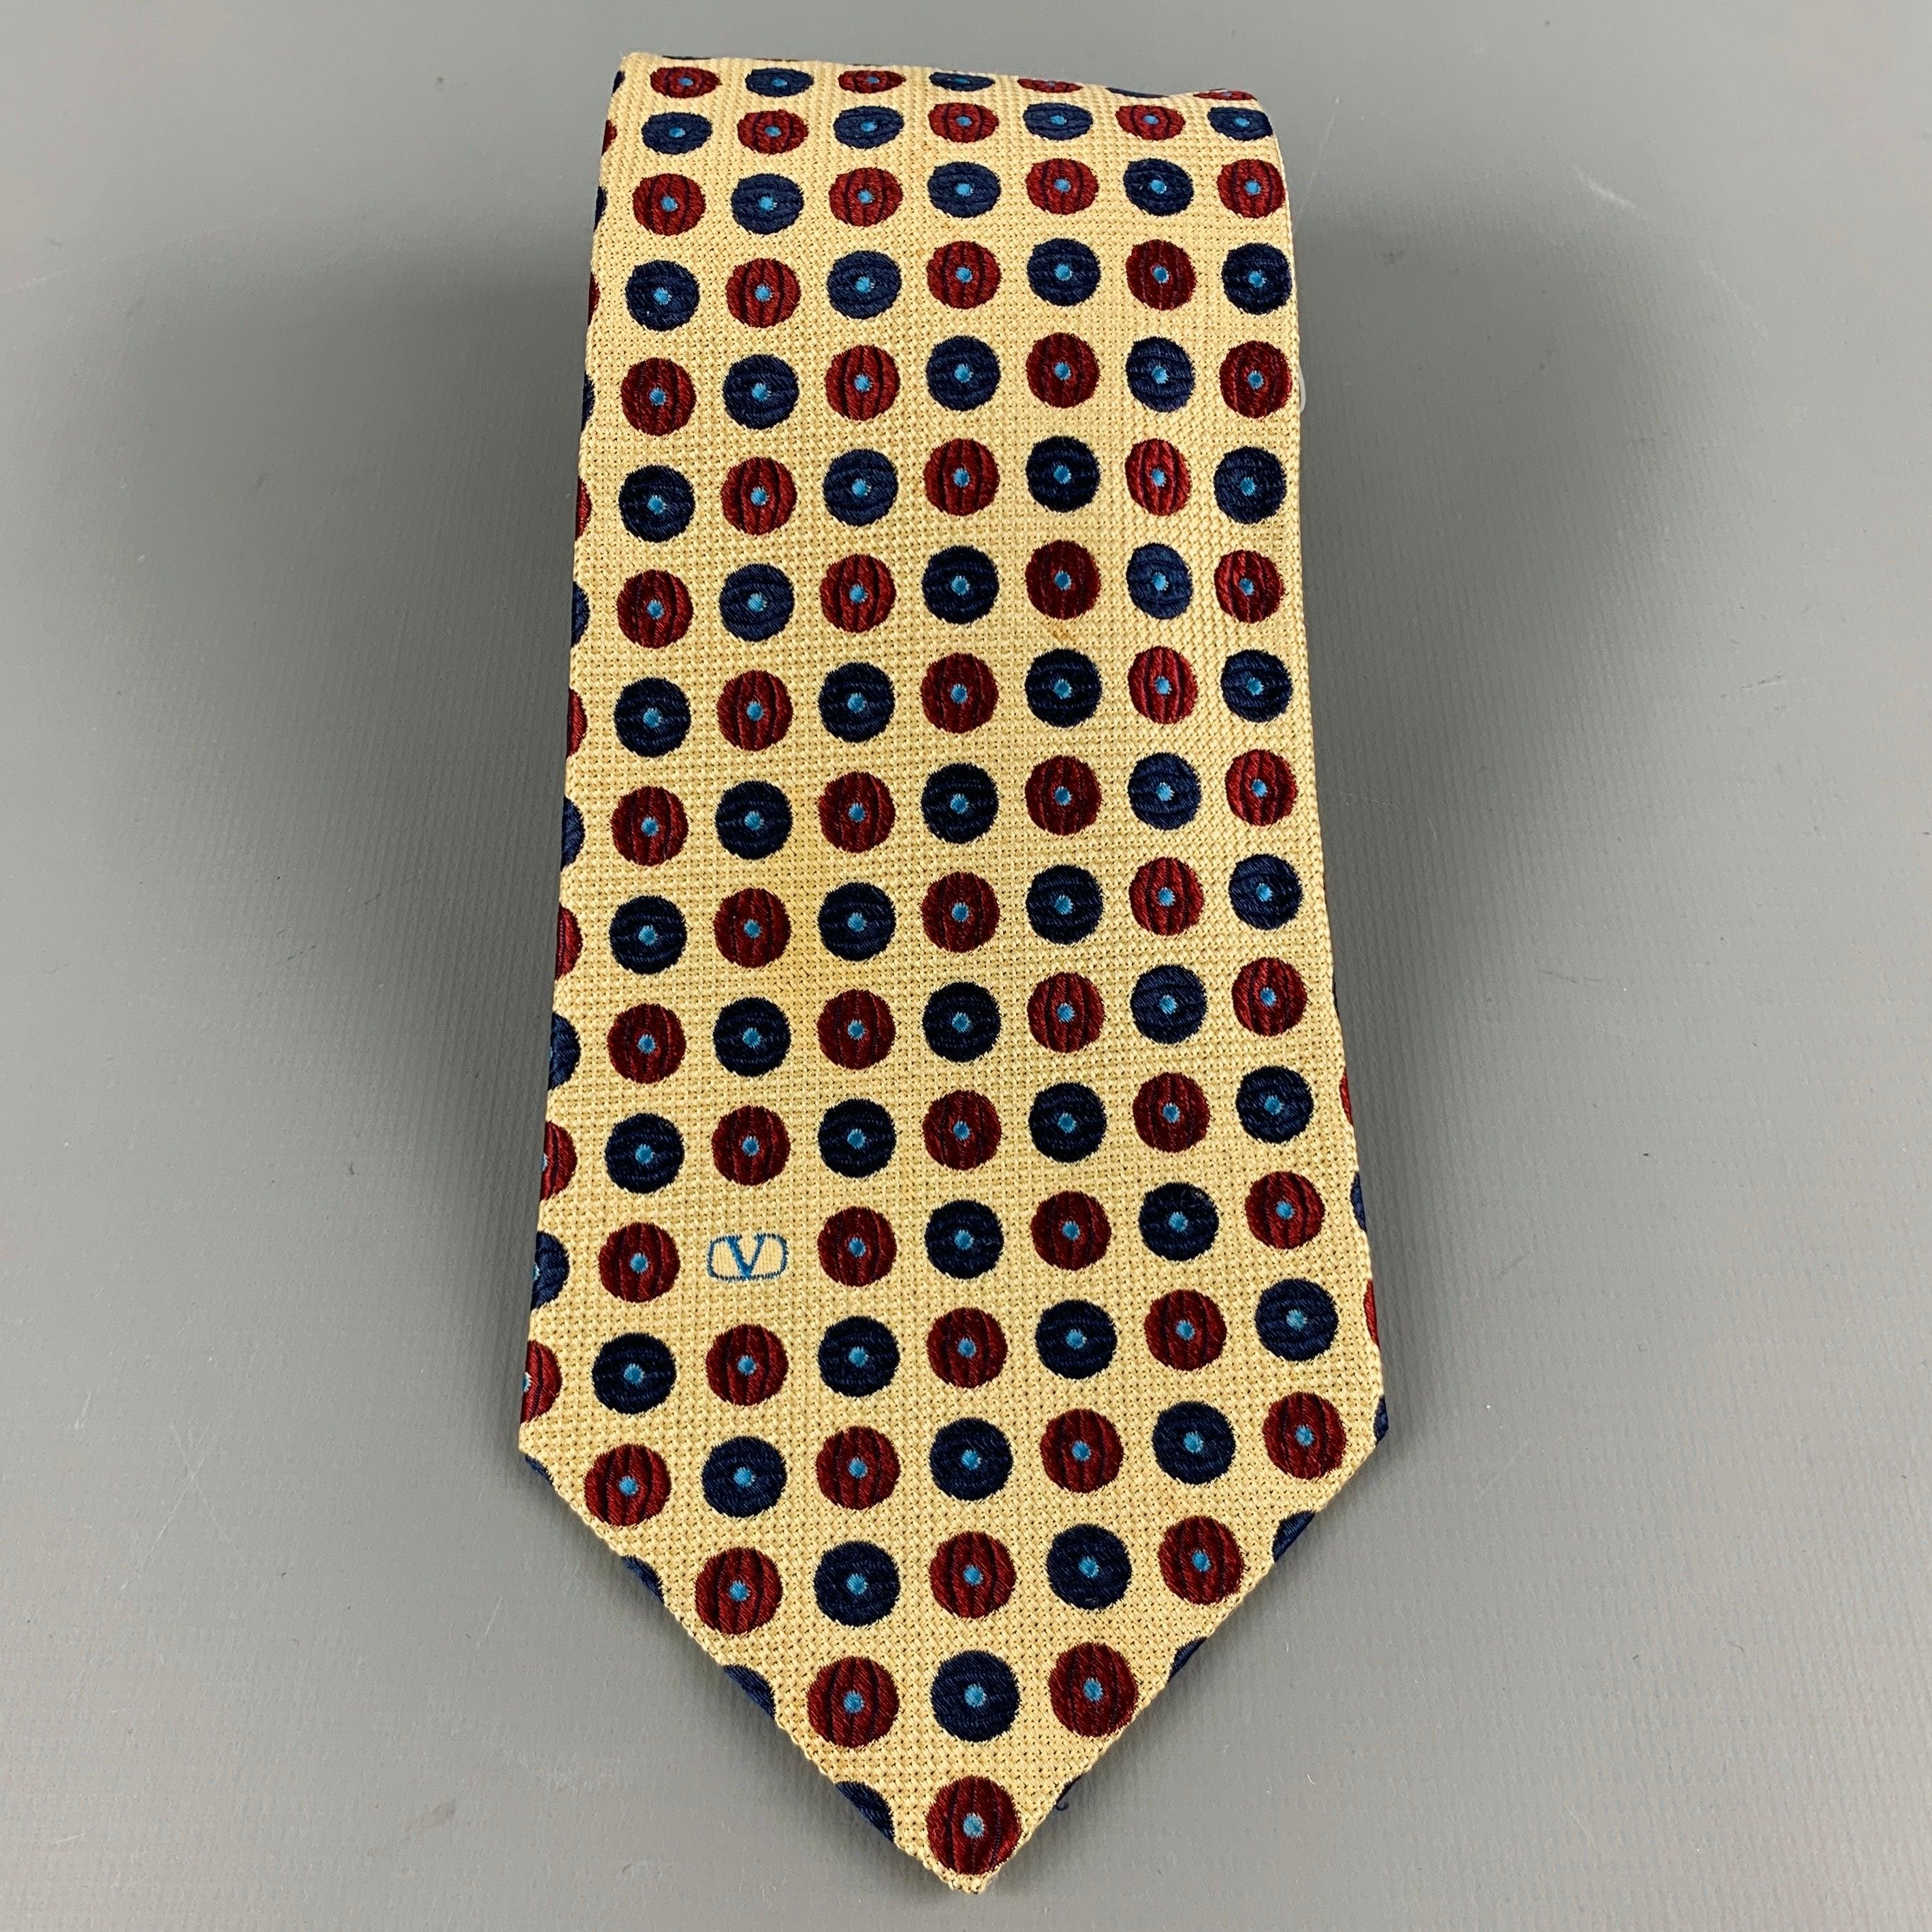 Vintage VALENTINO
necktie in a
yellow silk fabric featuring red and blue dots jacquard and signature Valentino monogram. Made in Italy.Excellent Pre-Owned Condition. 

Measurements: 
  Width: 3.5 inches Length: 57 inches 
  
  
 
Reference No.: